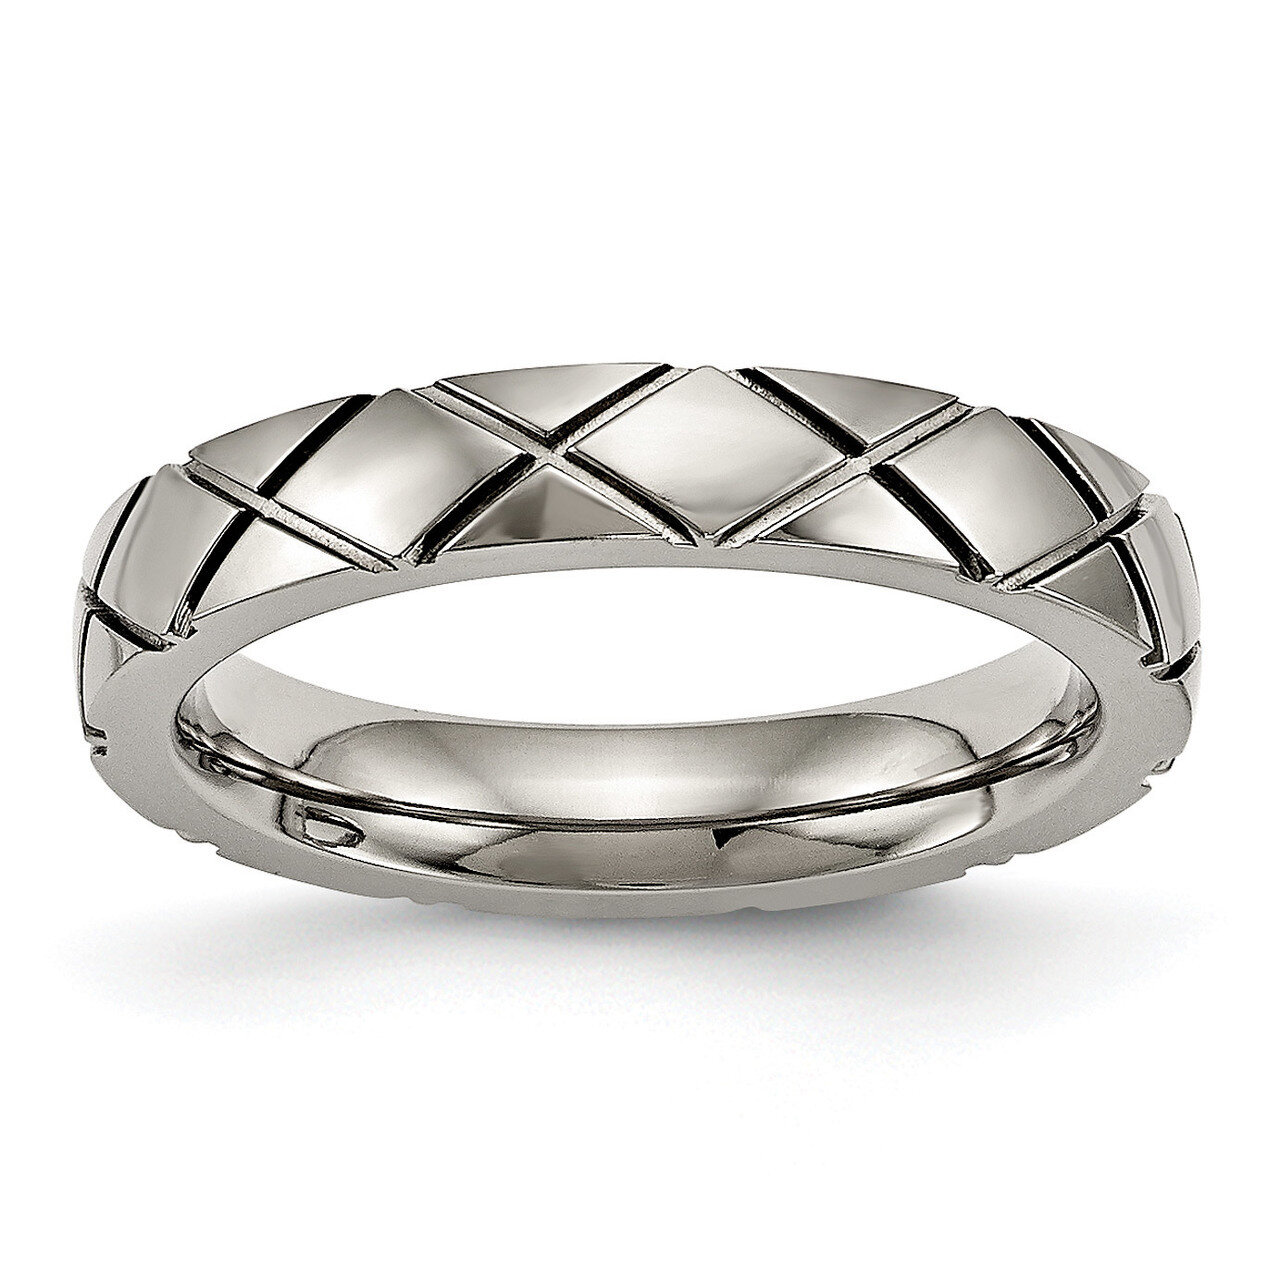 Criss Cross Grooved Ring Titanium Polished TB484